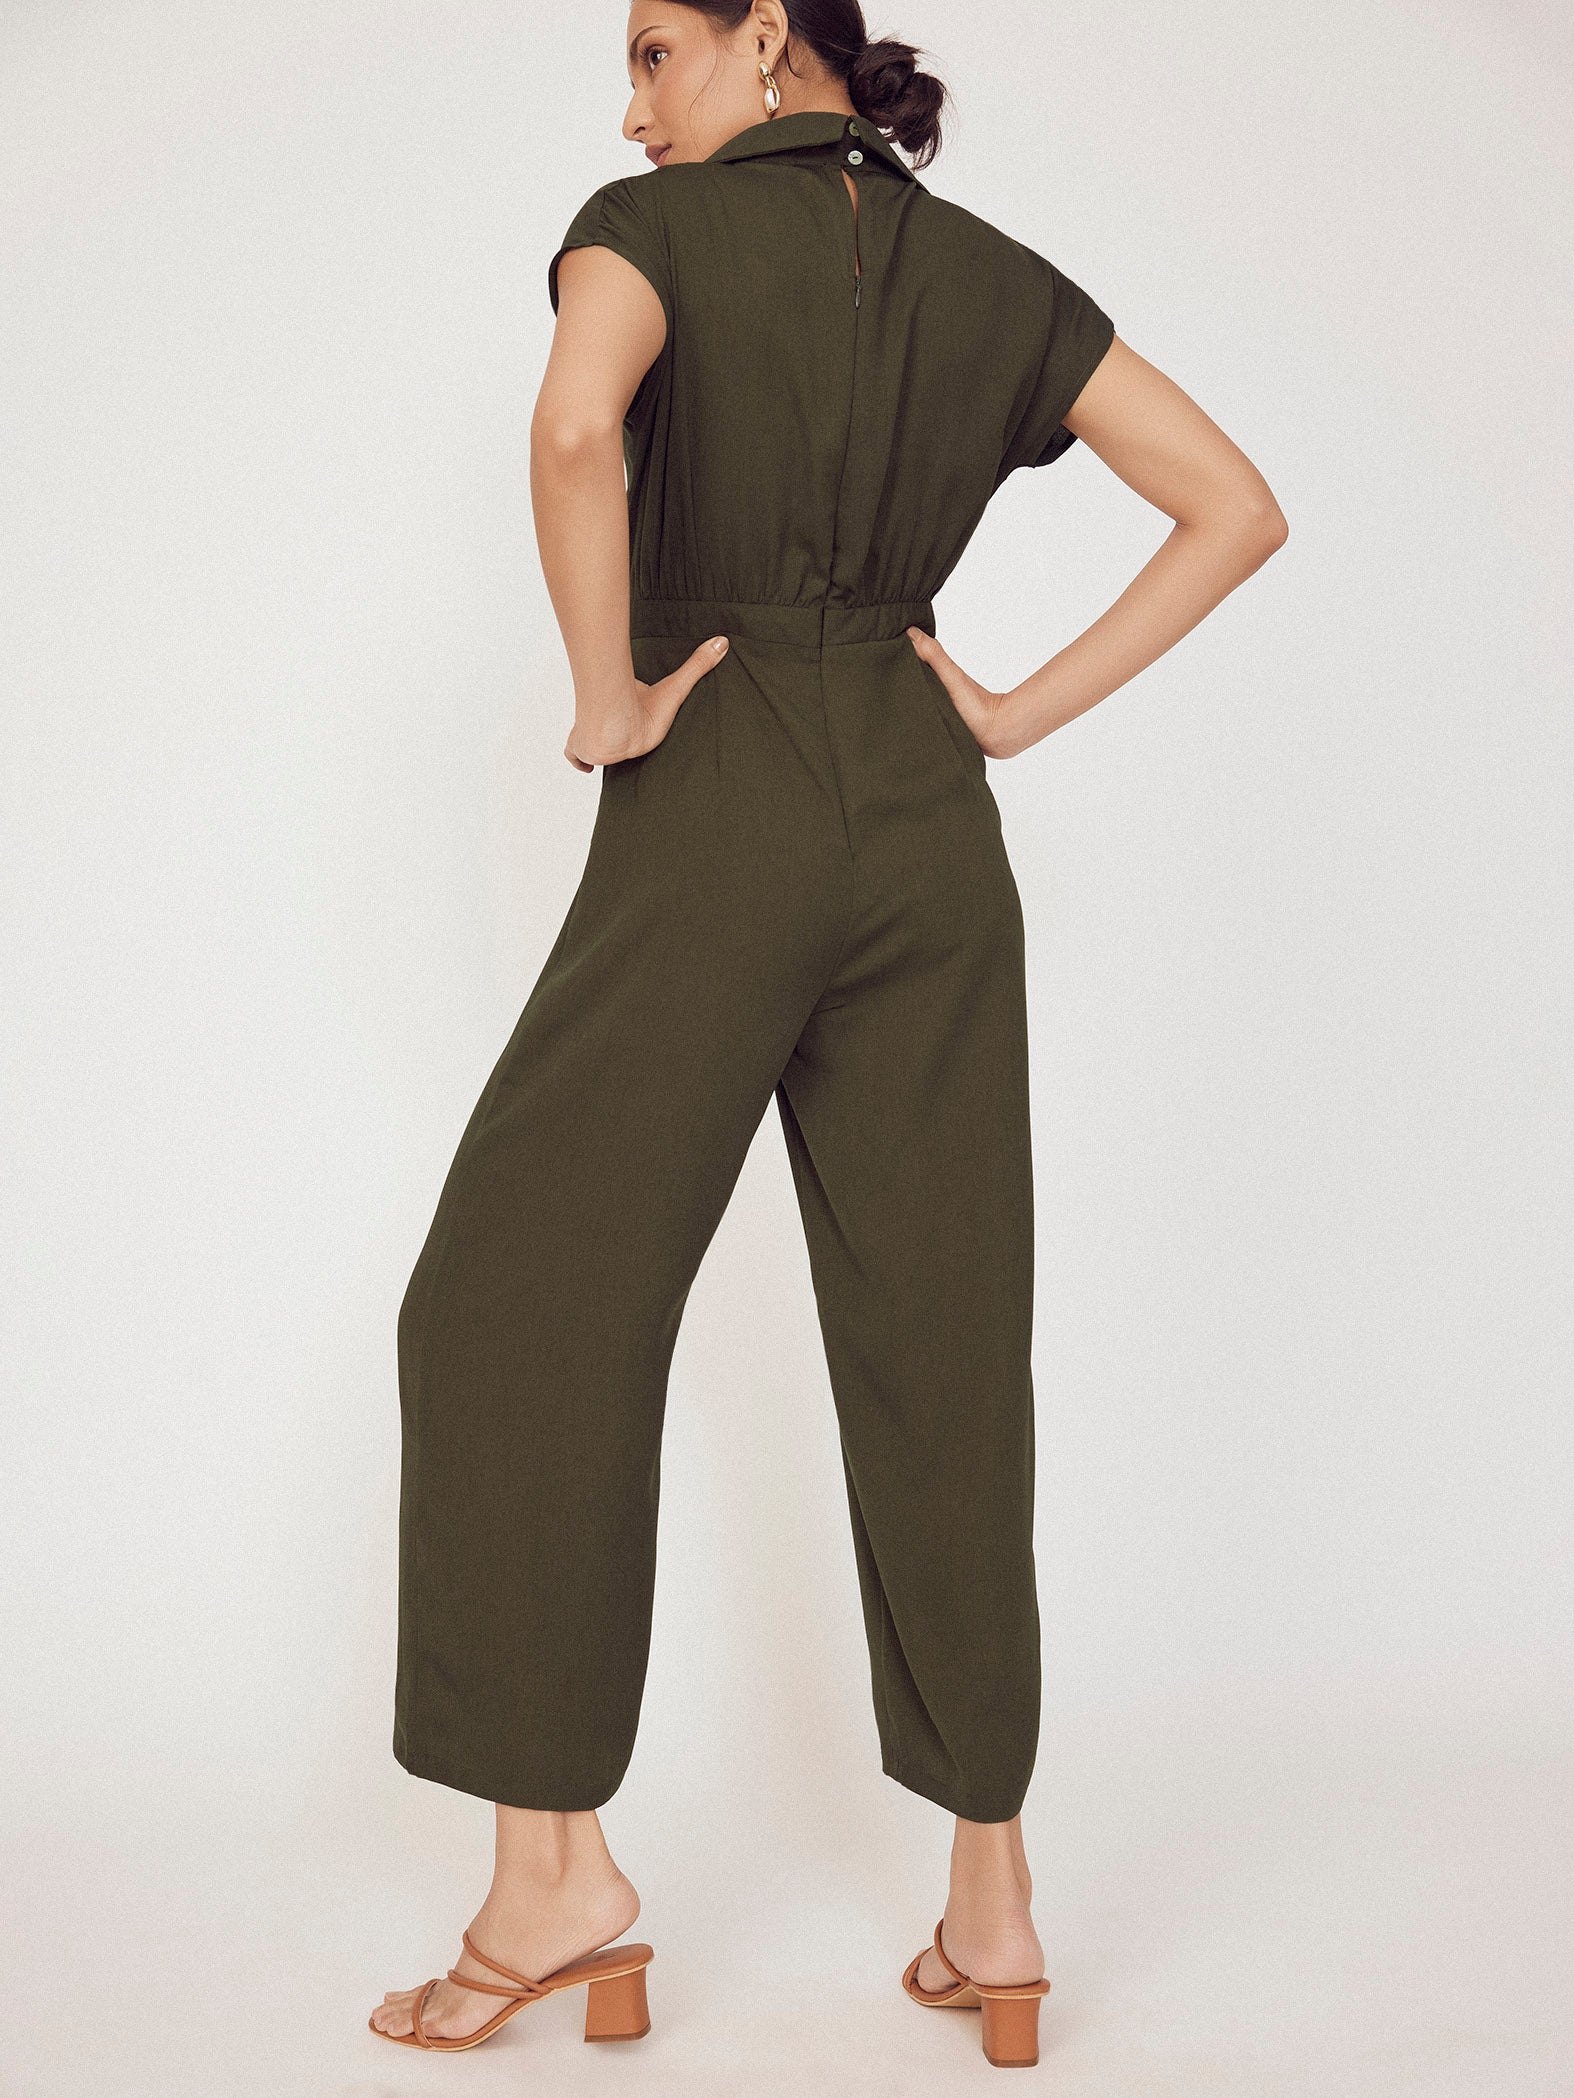 Olive Collared Wrap Jumpsuit